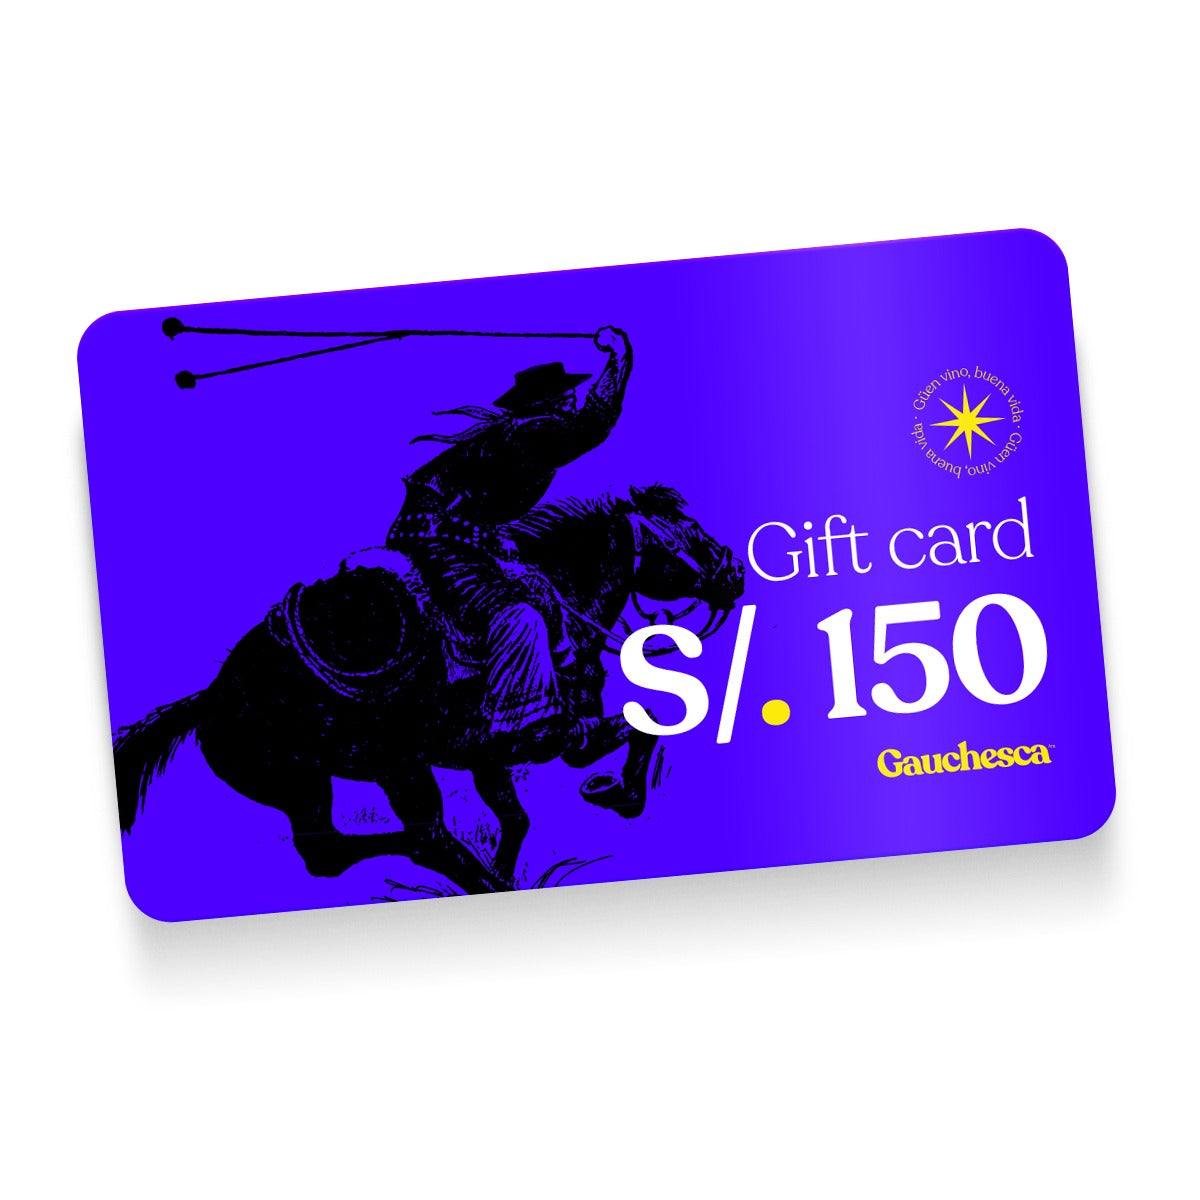 Gift Card S/ 150